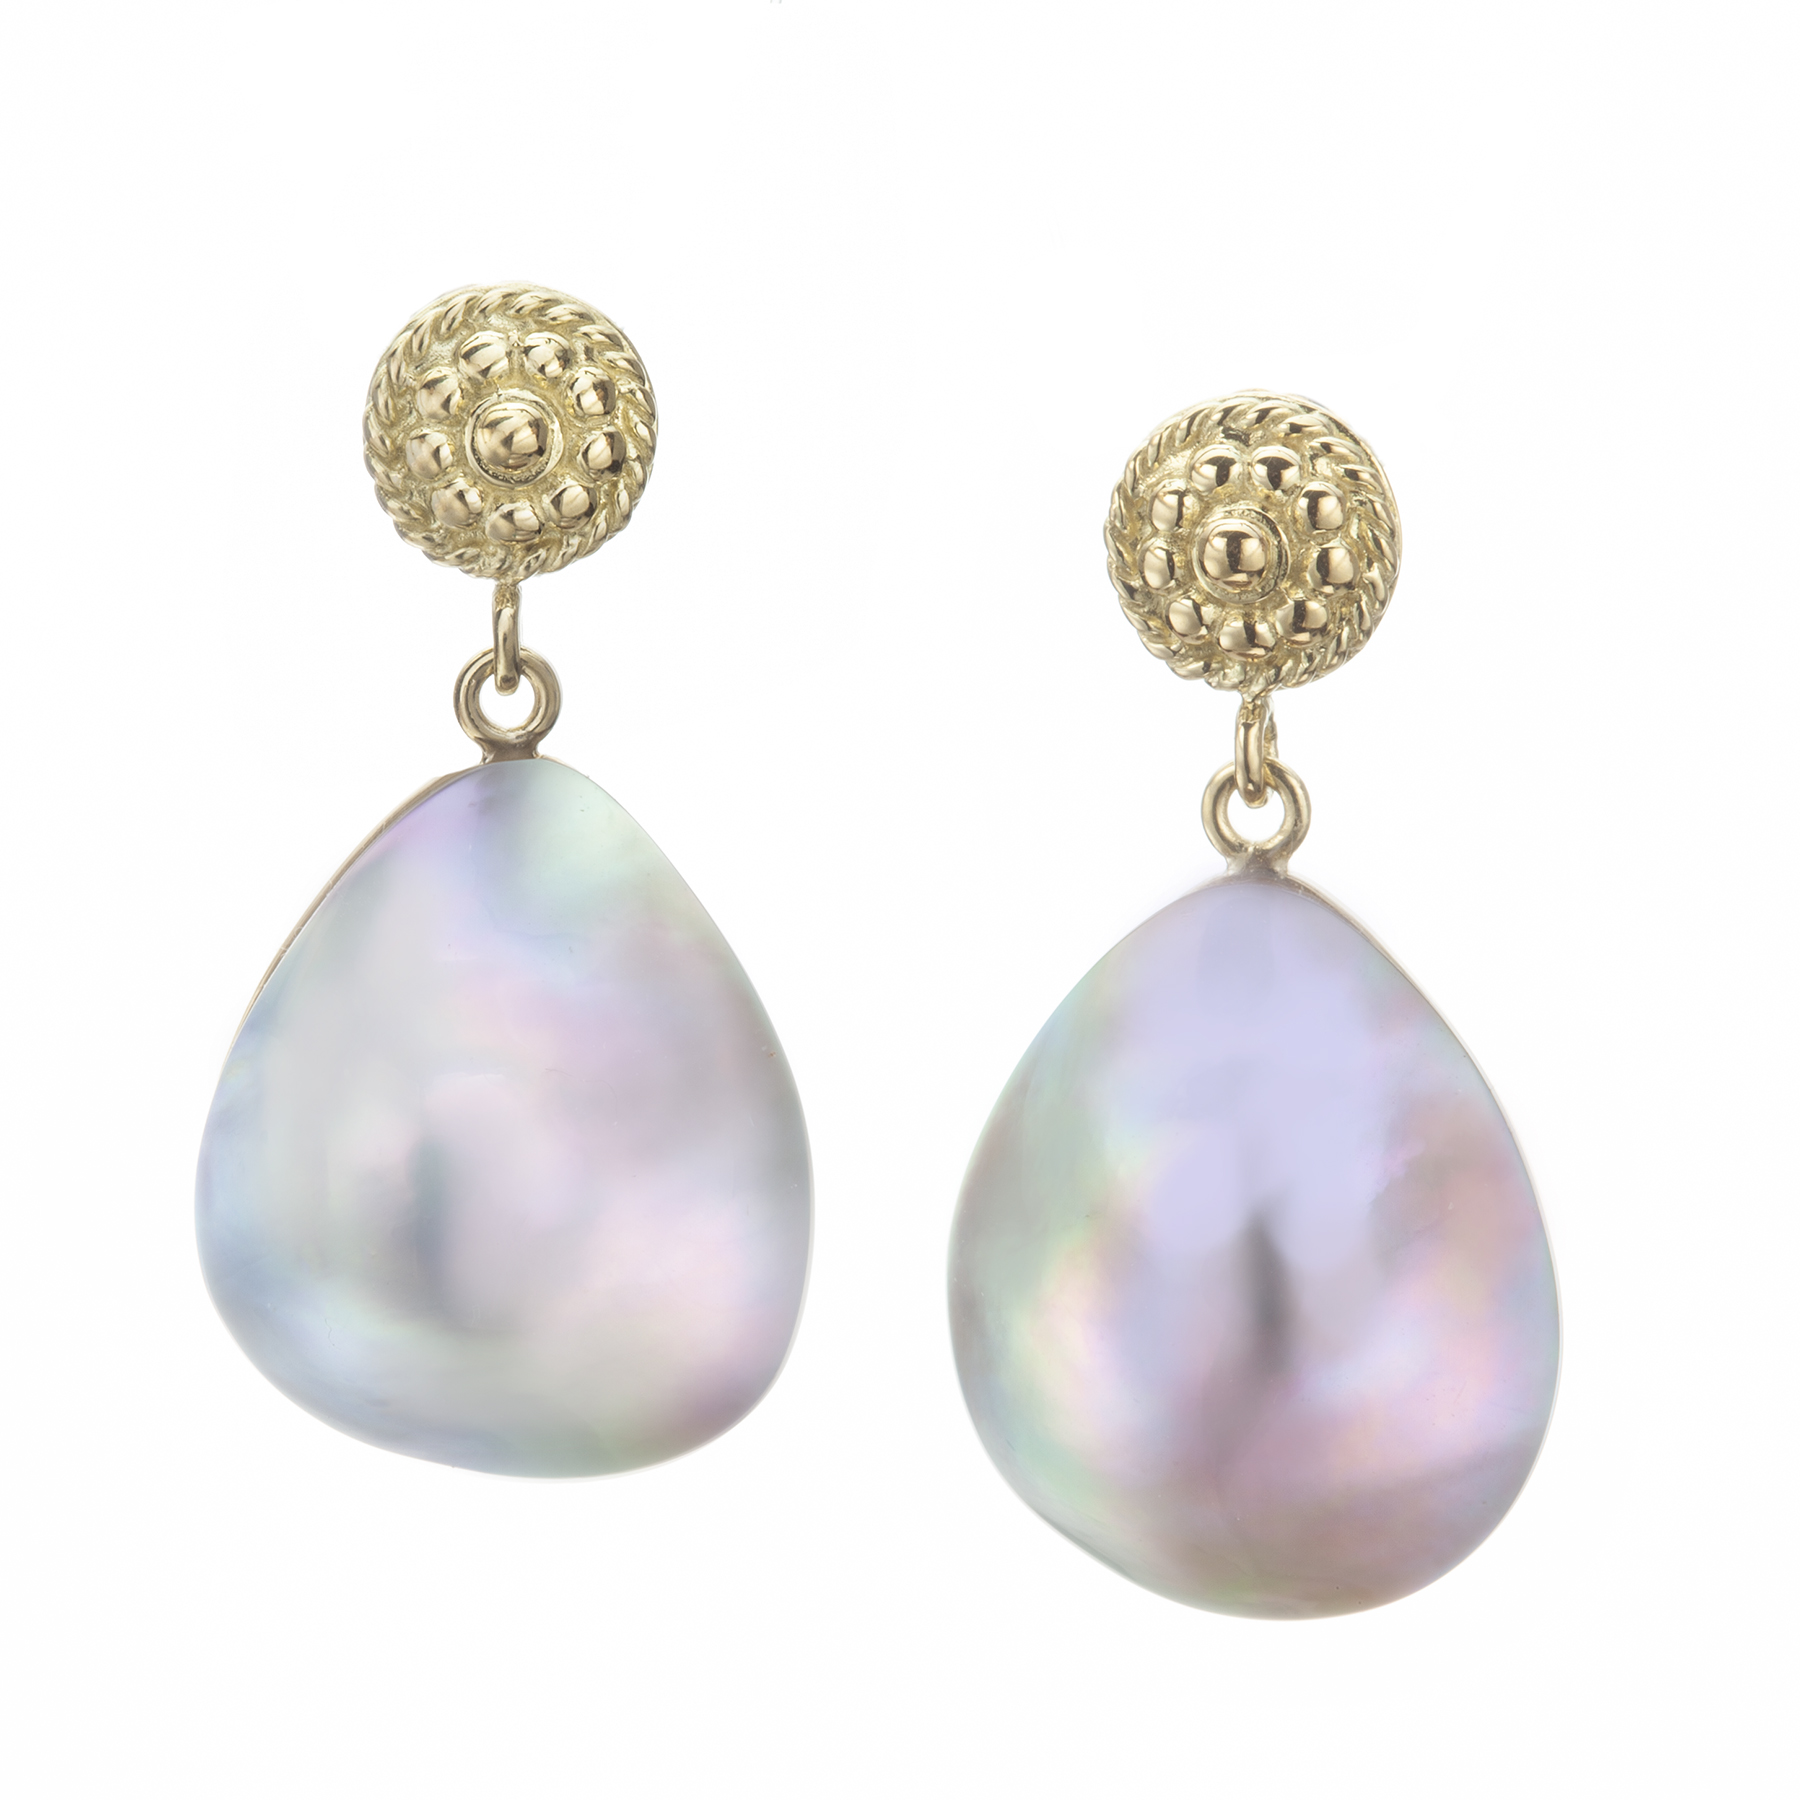 Sea of Cortez (Mexico) Baroque Pearl and 18K Yellow Gold Earrings, by Christina Malle